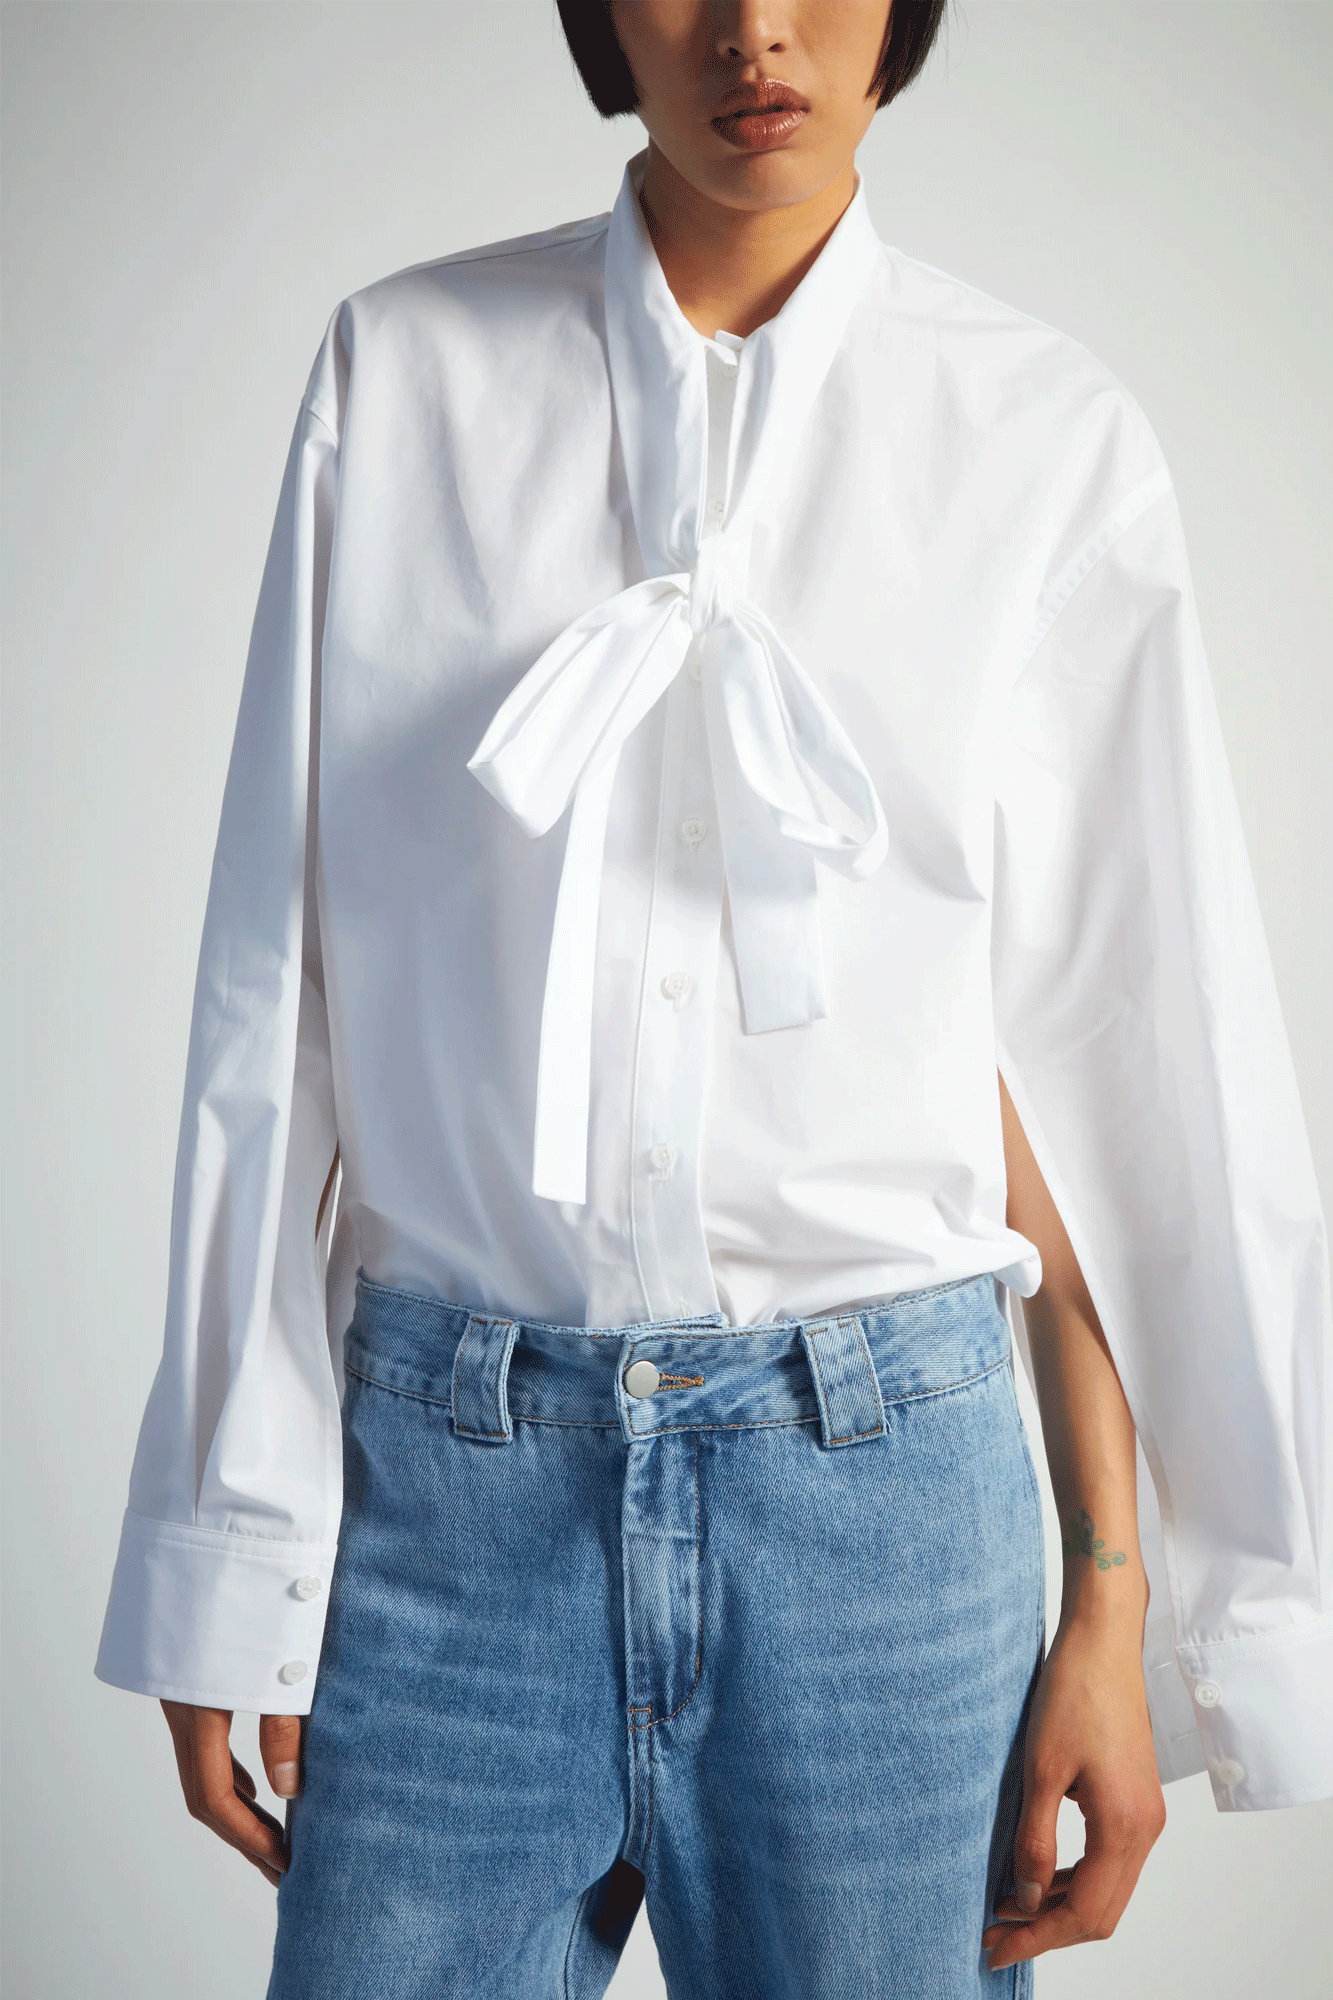 Elevate your wardrobe with the Kimberly Bow Tie Blouse from Saint Art.